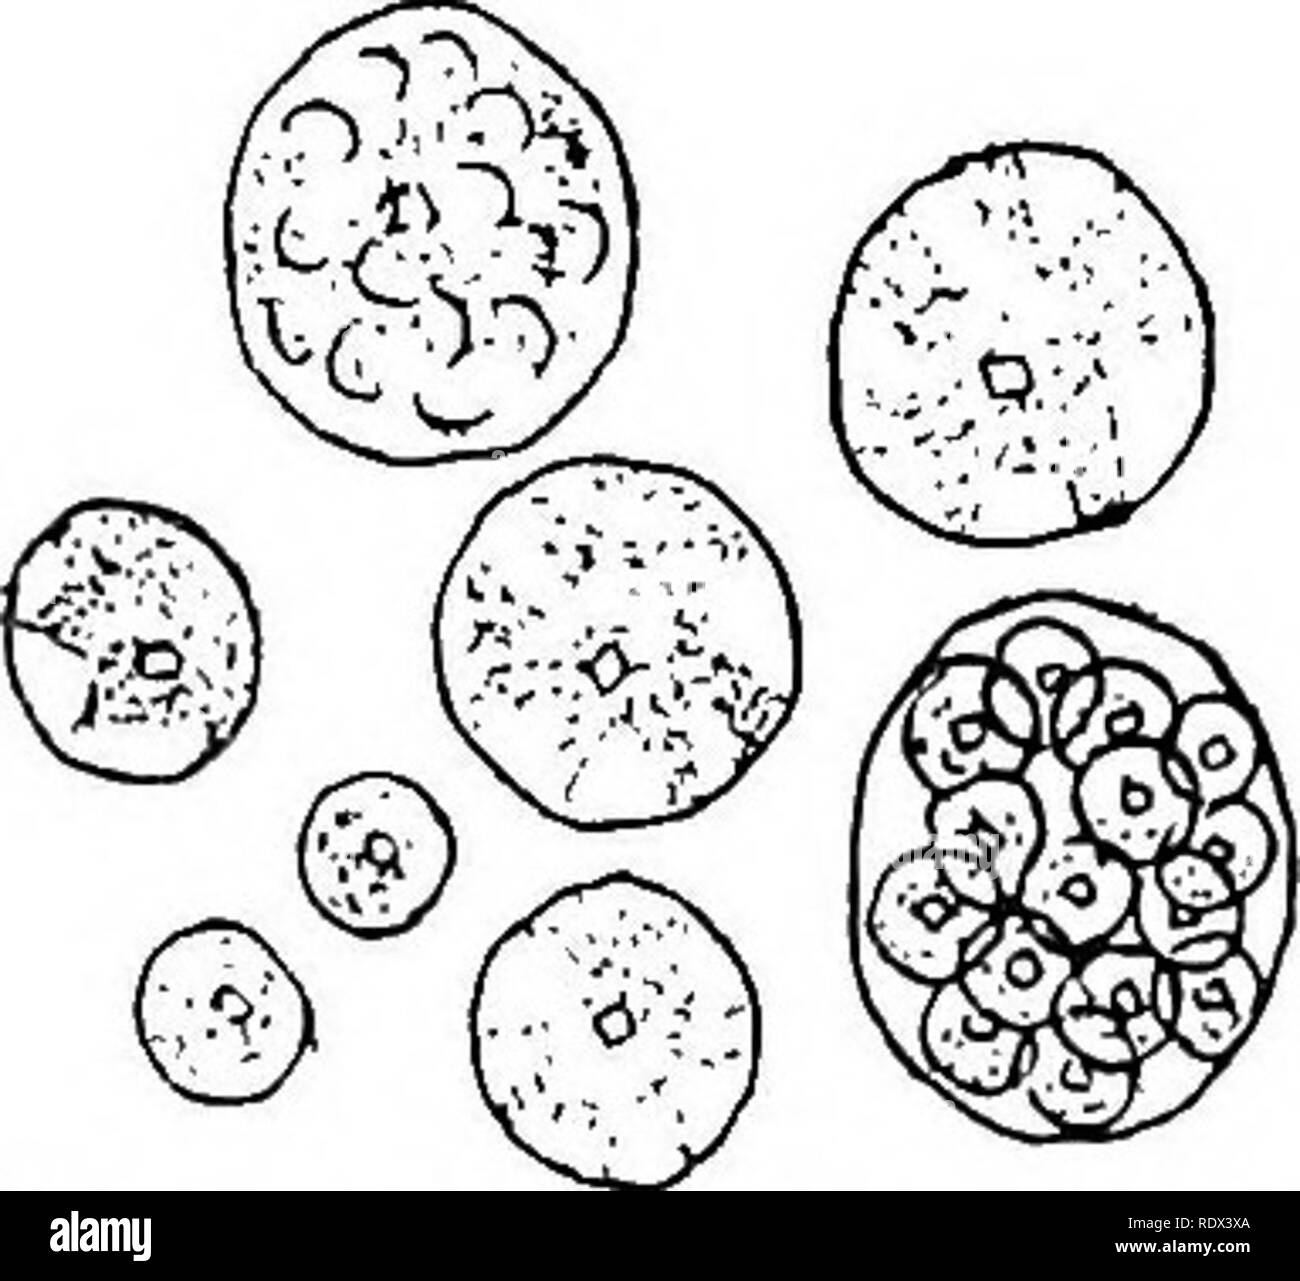 . Lichens. Lichens. 56 CONSTITUENTS OF THE LICHEN THALLUS. Fig. 2 3. Cystococcus Cladon iae pyxidatae Chod. from cul- ture X 8oo (after Chodat). of species and he designates the algae, according to the lichen in which they occur, as Cystococcus Cladoniae pyxidatae, C. Cladoniae fimbriatae, etc. Meanwhile Paulson and Somerville Hastings^-by their careful research on the growing thallus have thrown considerable light on the identity of the Protococcaceous lichen gonidium. They selected such well-known lichens as Xanthoria parietina, Cladonia spp. and others, which they collected during the sprin Stock Photo